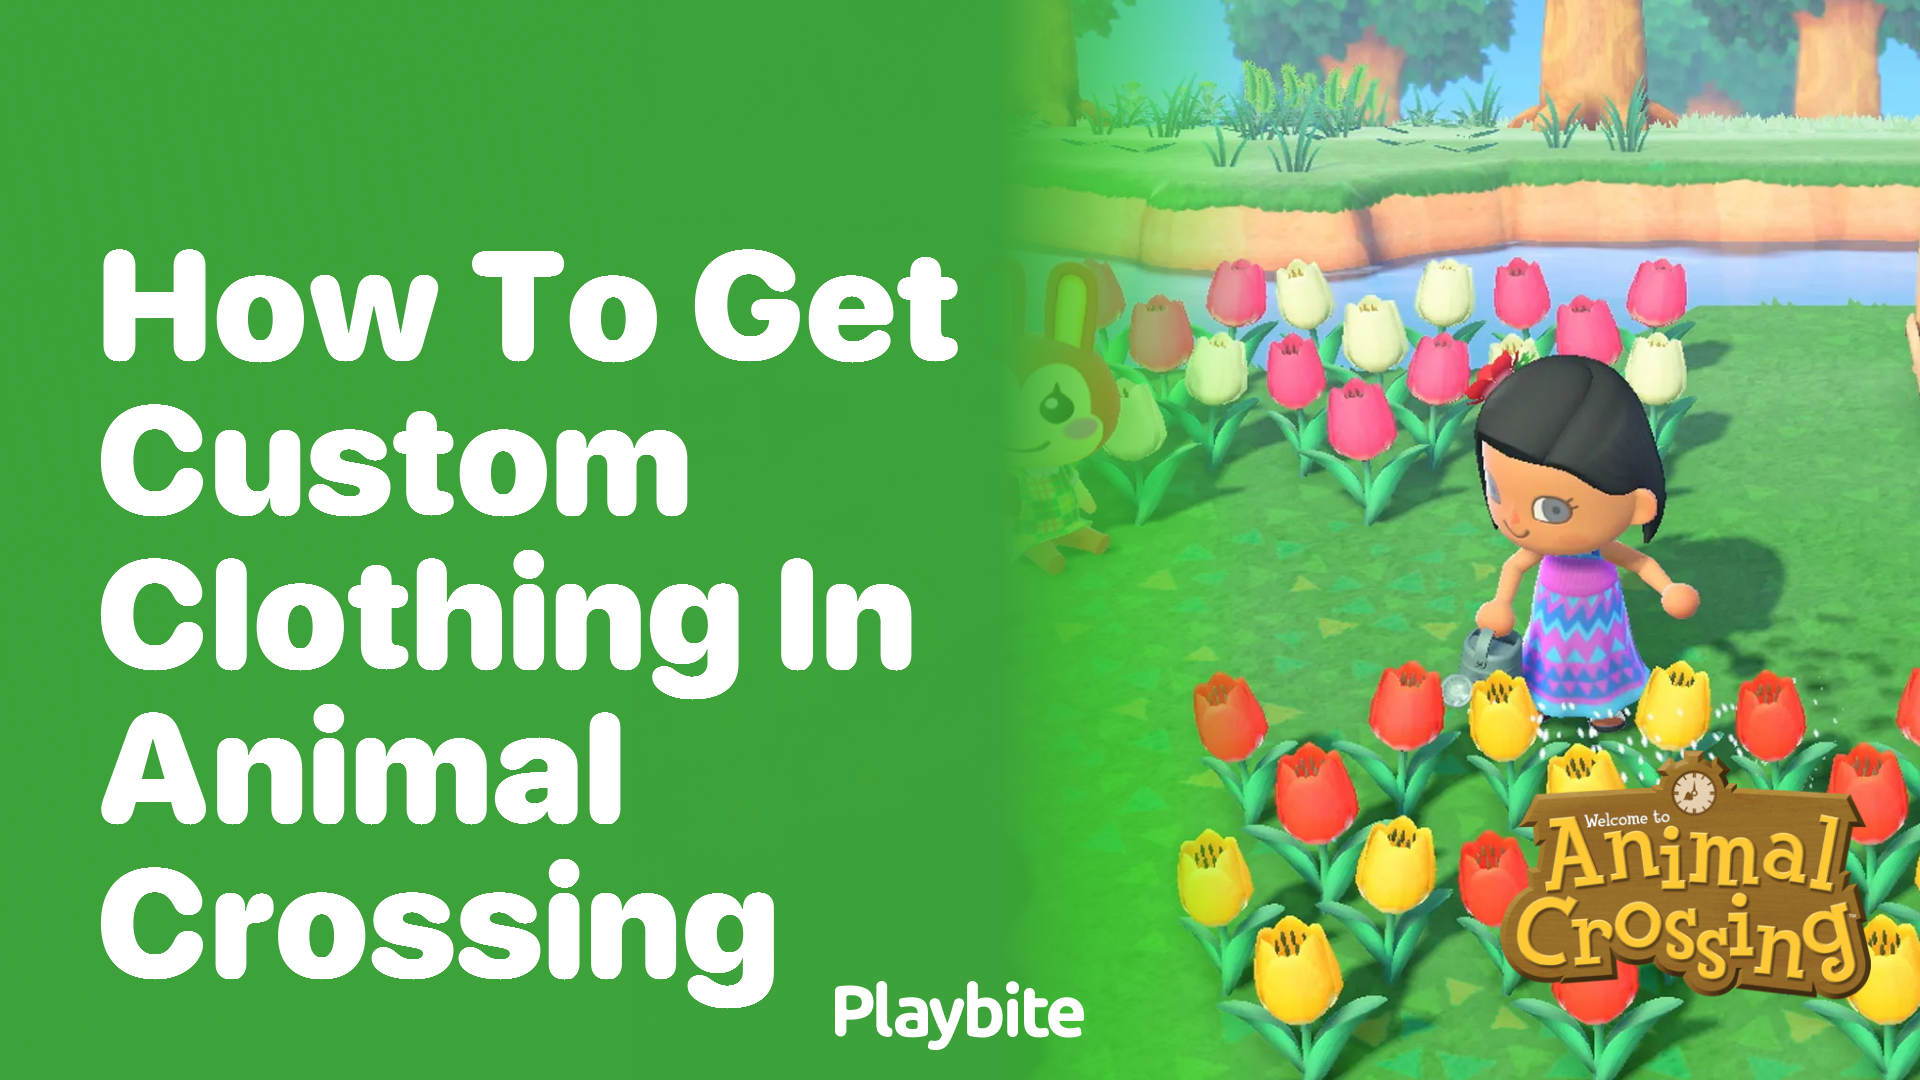 How to Get Custom Clothing in Animal Crossing